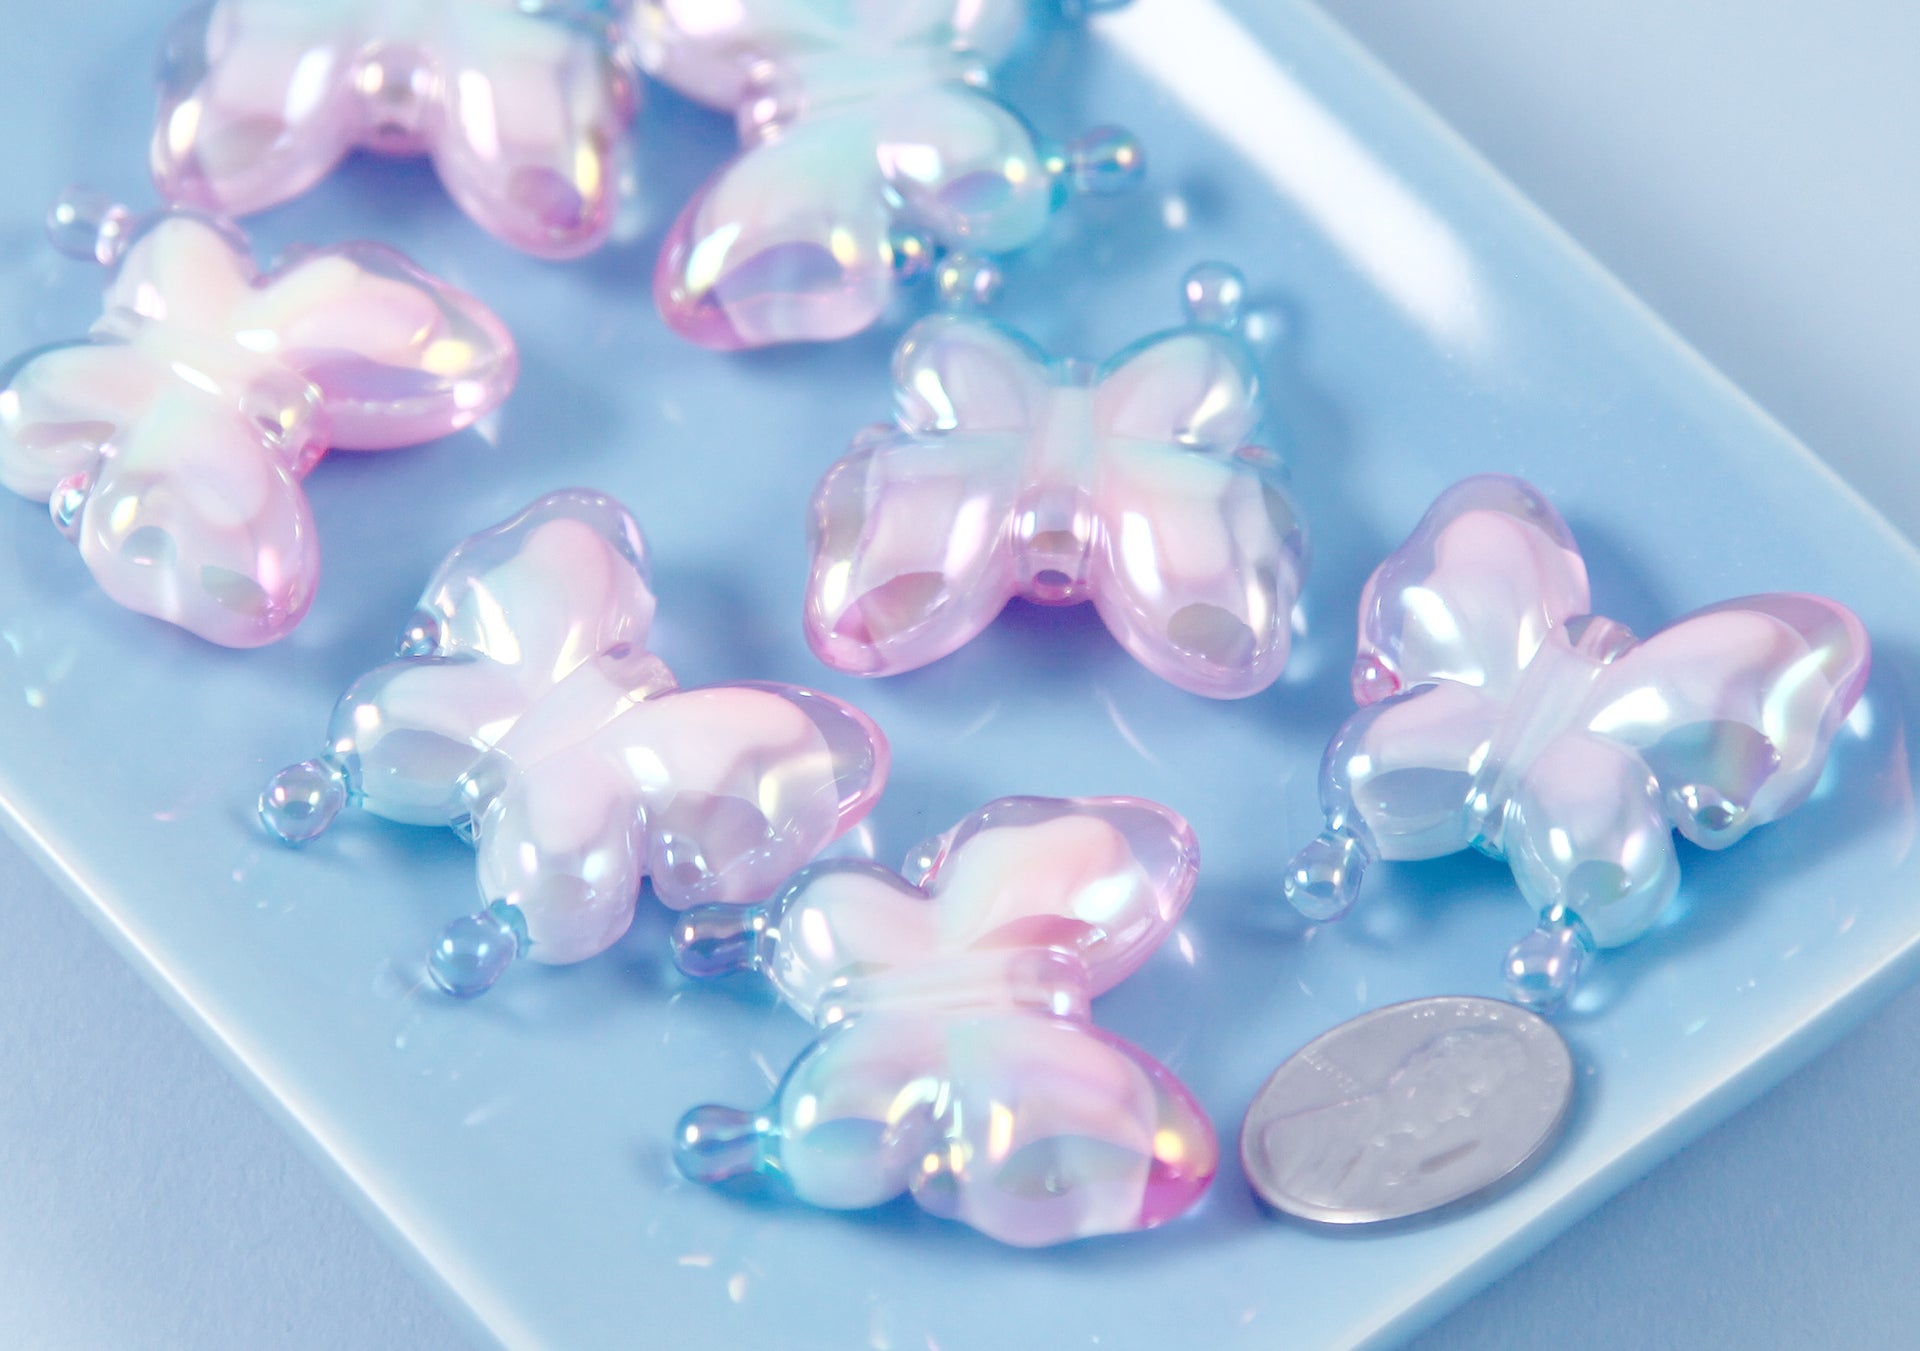 Butterfly Beads - 30mm Pastel Pink and Blue Gradient AB Butterfly  Iridescent Acrylic Beads or Resin Beads - 6 pc set